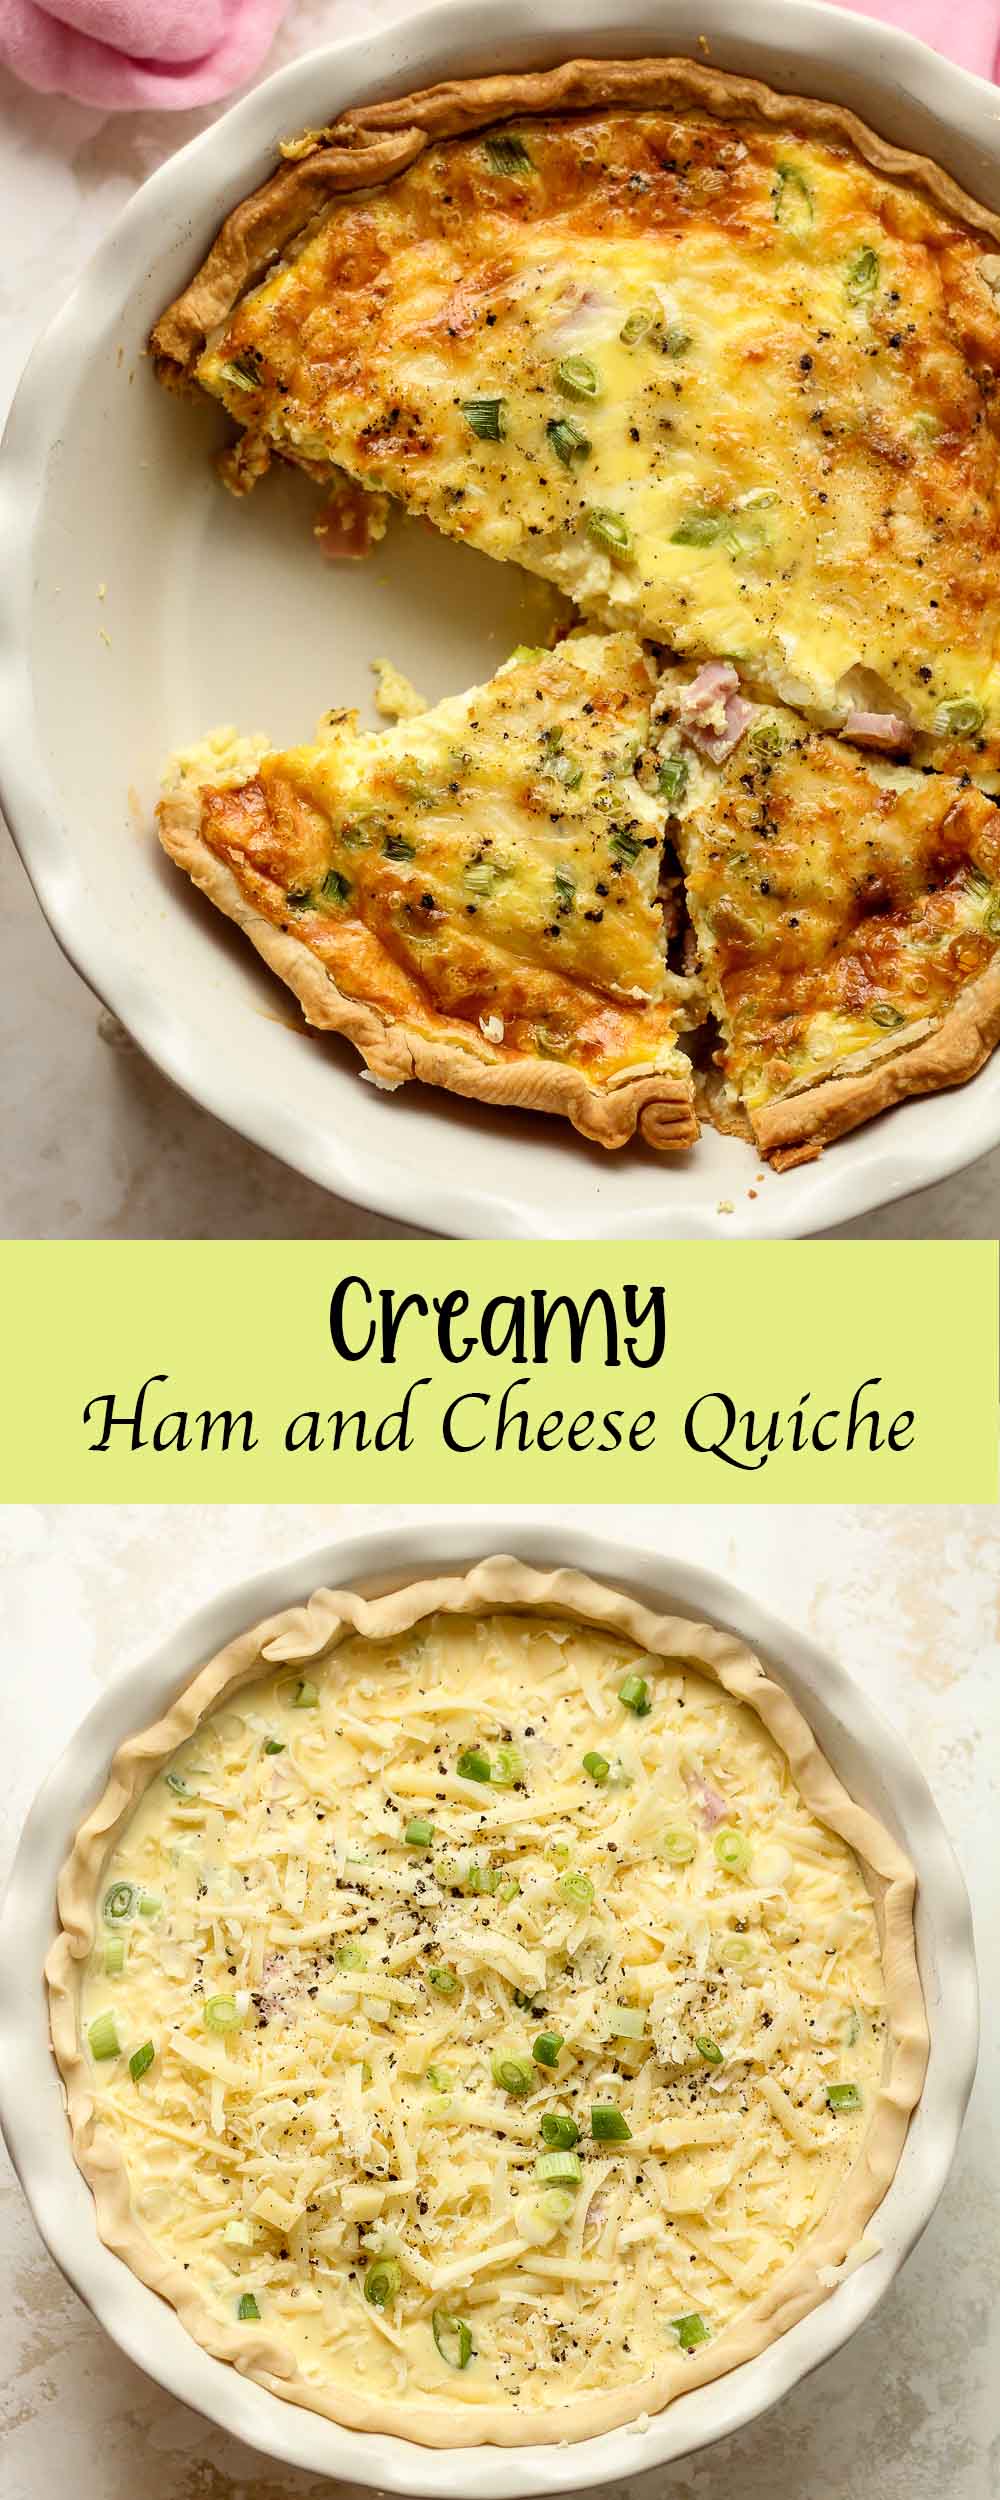 Two photos for creamy ham and cheese quiche.